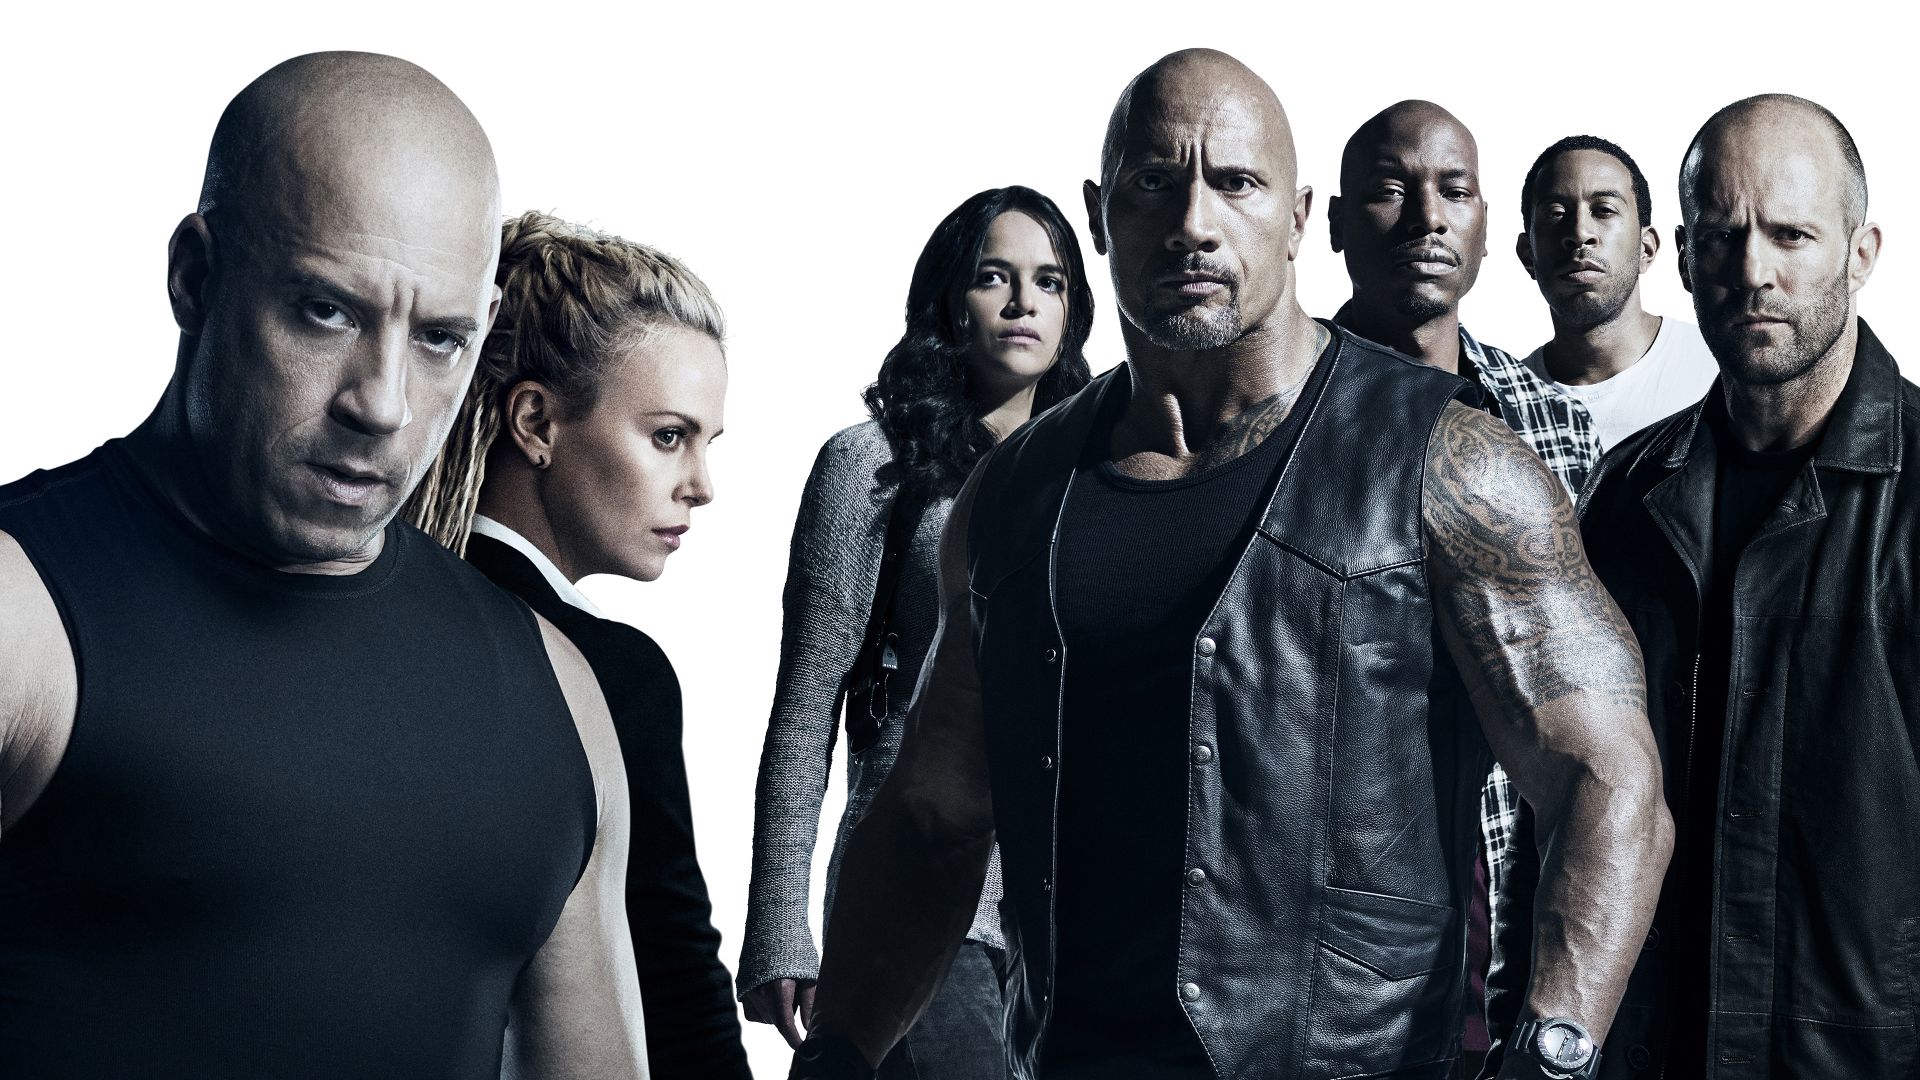 The Fate of the Furious, Vin Diesel, Dwayne Johnson, Jason Statham, Michelle Rodriguez, best movies (horizontal)